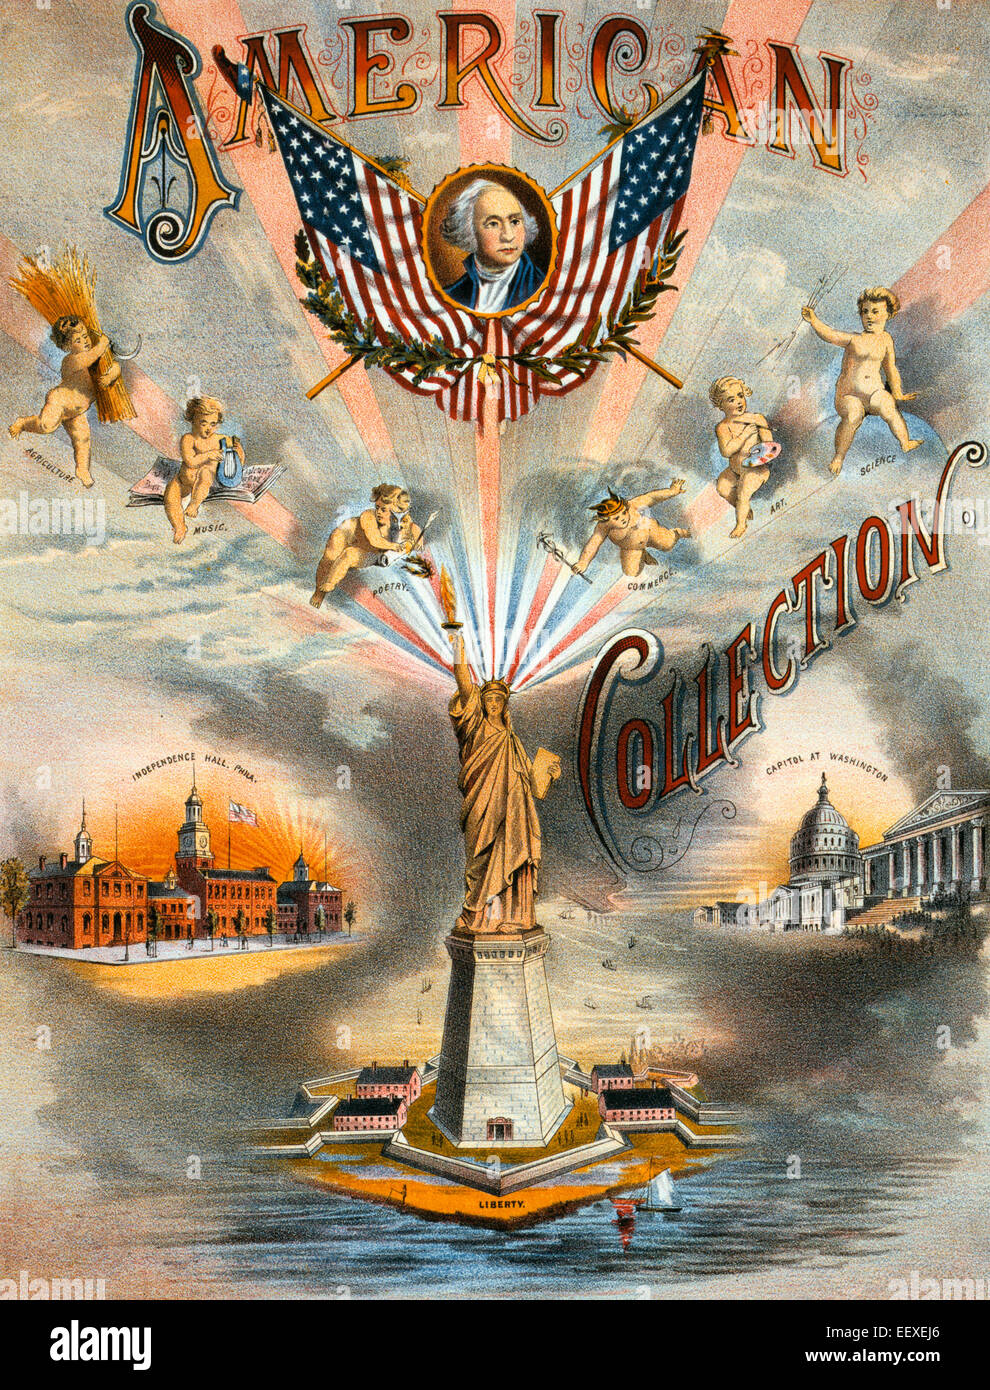 American collection- sheet music cover for the 'American Collection' showing the Statue of Liberty, Indepencence Hall in Philadelphia, the U.S. Capitol in Washington, D.C., a bust portrait of George Washington flanked by two American flags, and six cherubs labeled 'Agriculture' with a shock of wheat, 'Music' with a lyre, 'Poetry' with an owl, quill, and laurel crown, 'Commerce' wearing a winged crown and holding a caduceus, 'Art' holding a brush and palette, and 'Science' holding bolts of lightning. Stock Photo